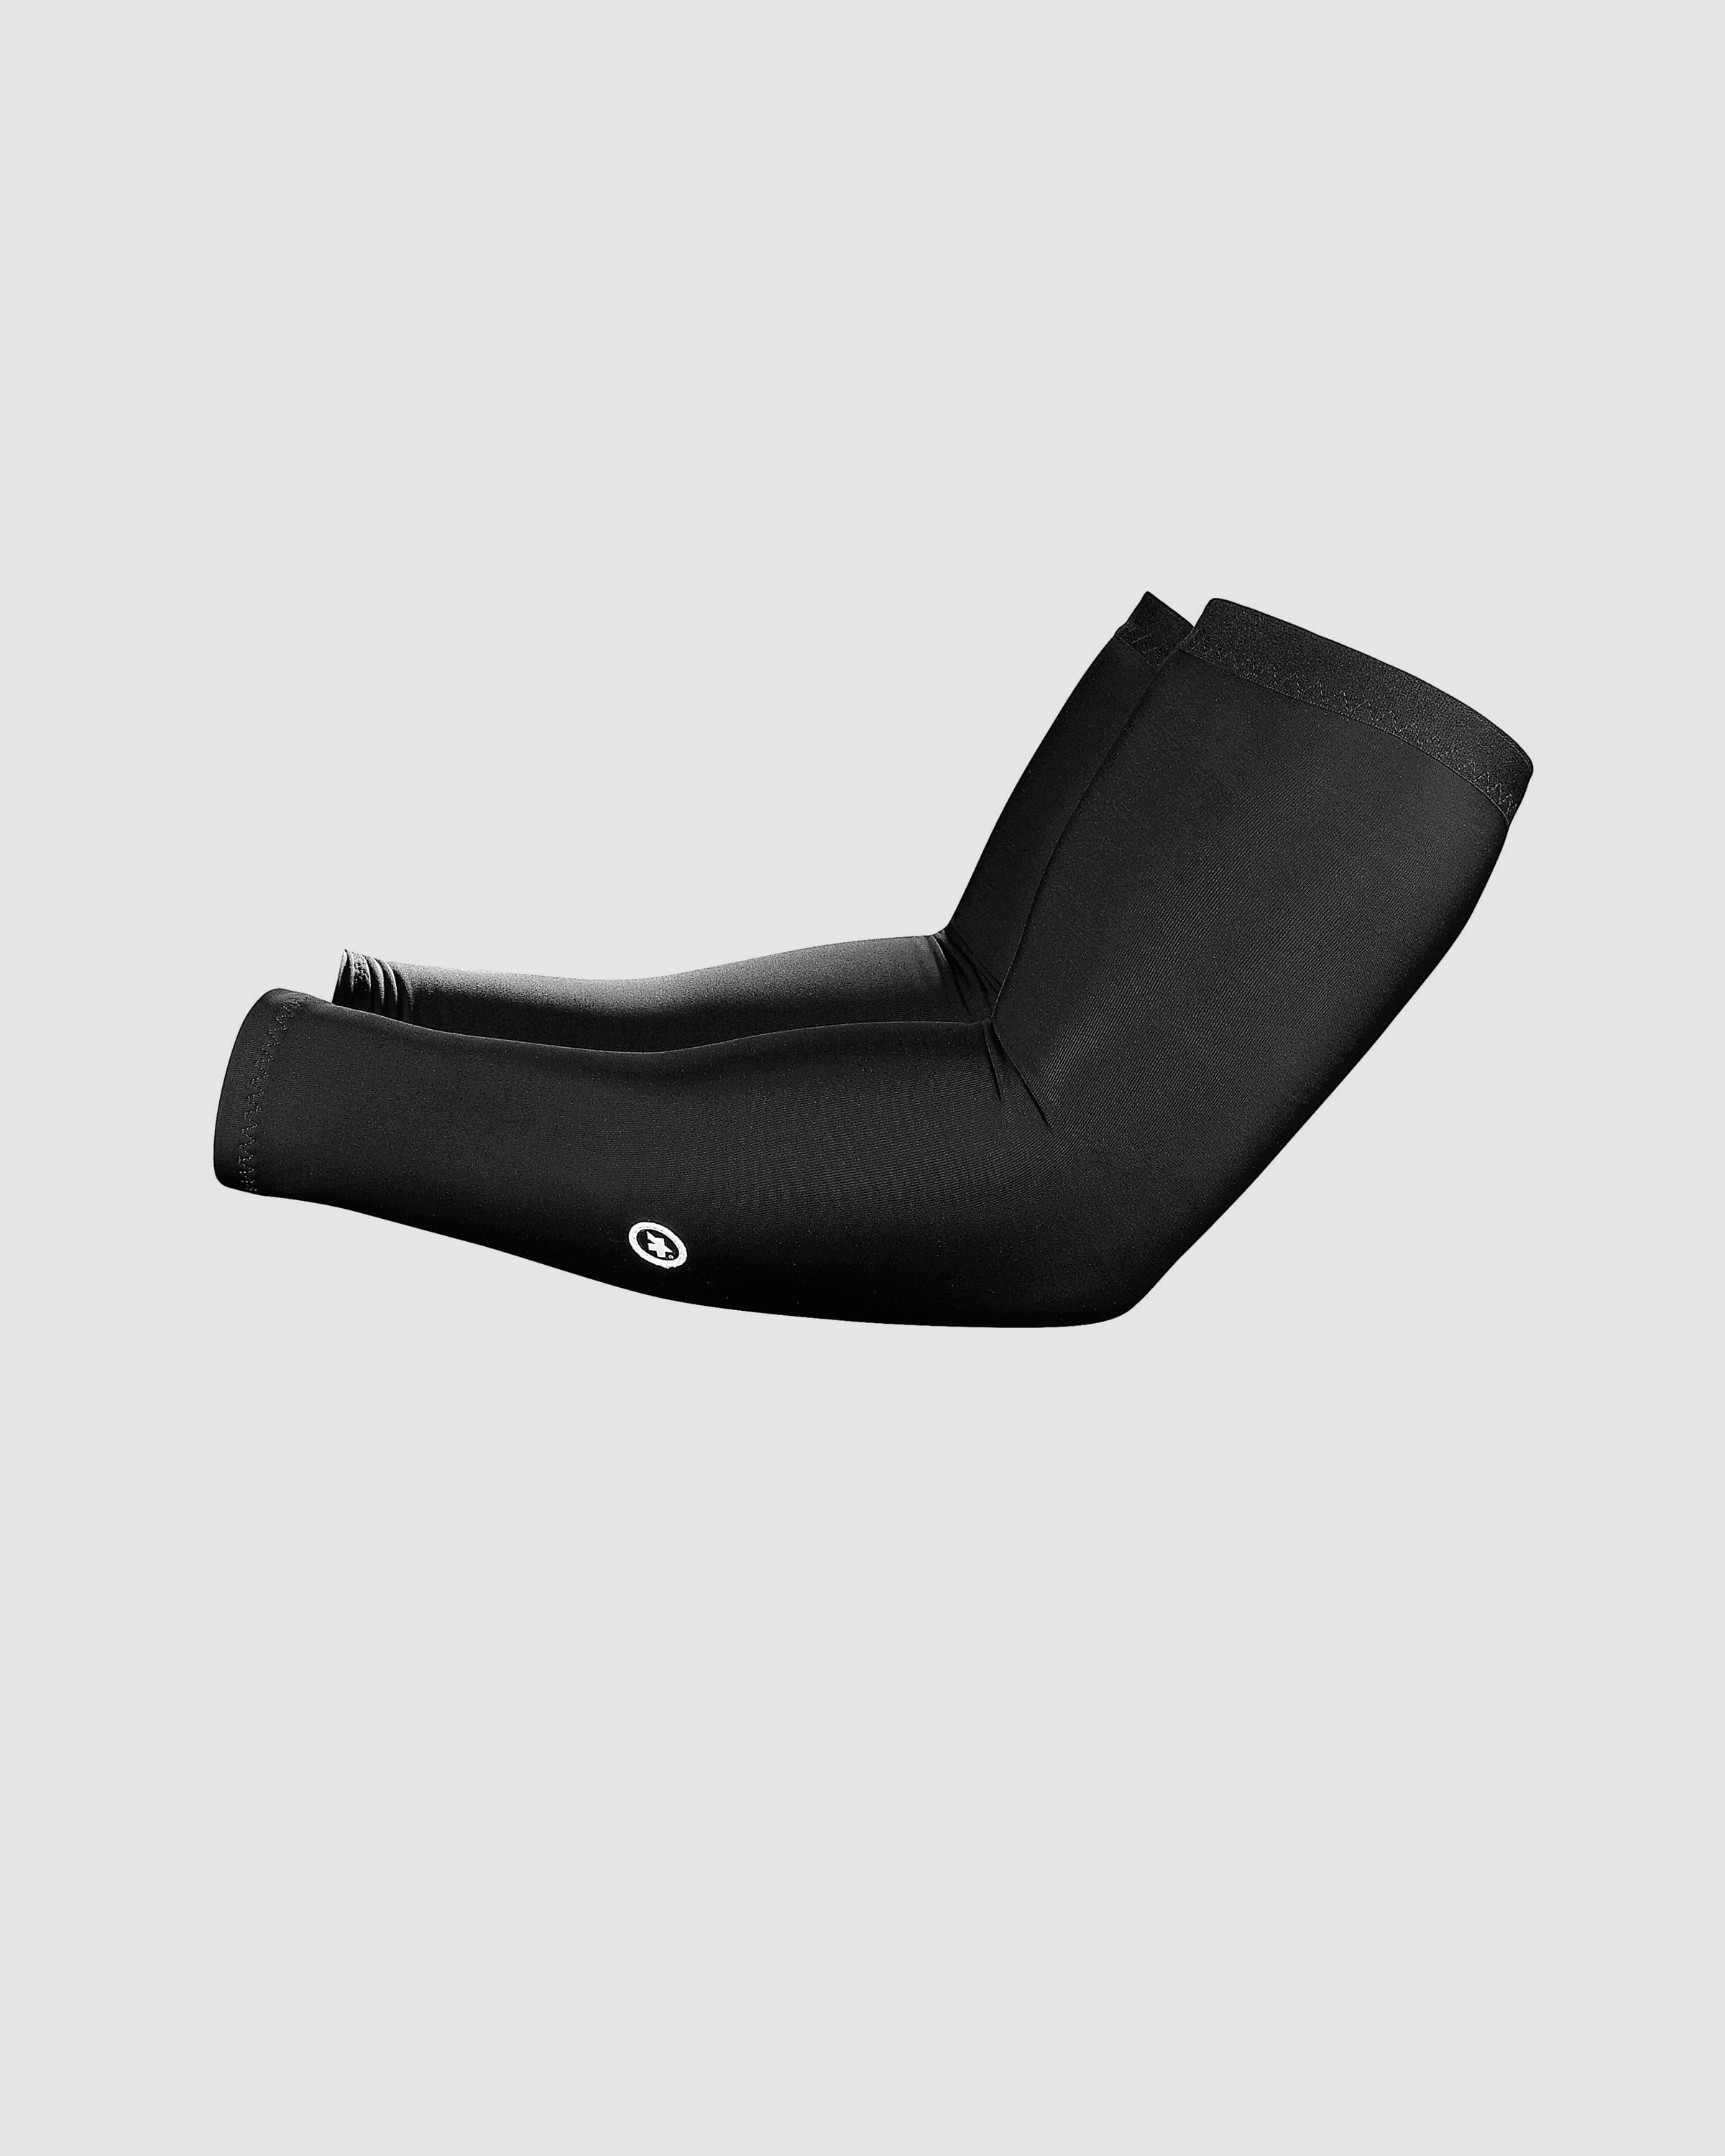 armWarmer-evo7 - ASSOS Of Switzerland - Official Outlet